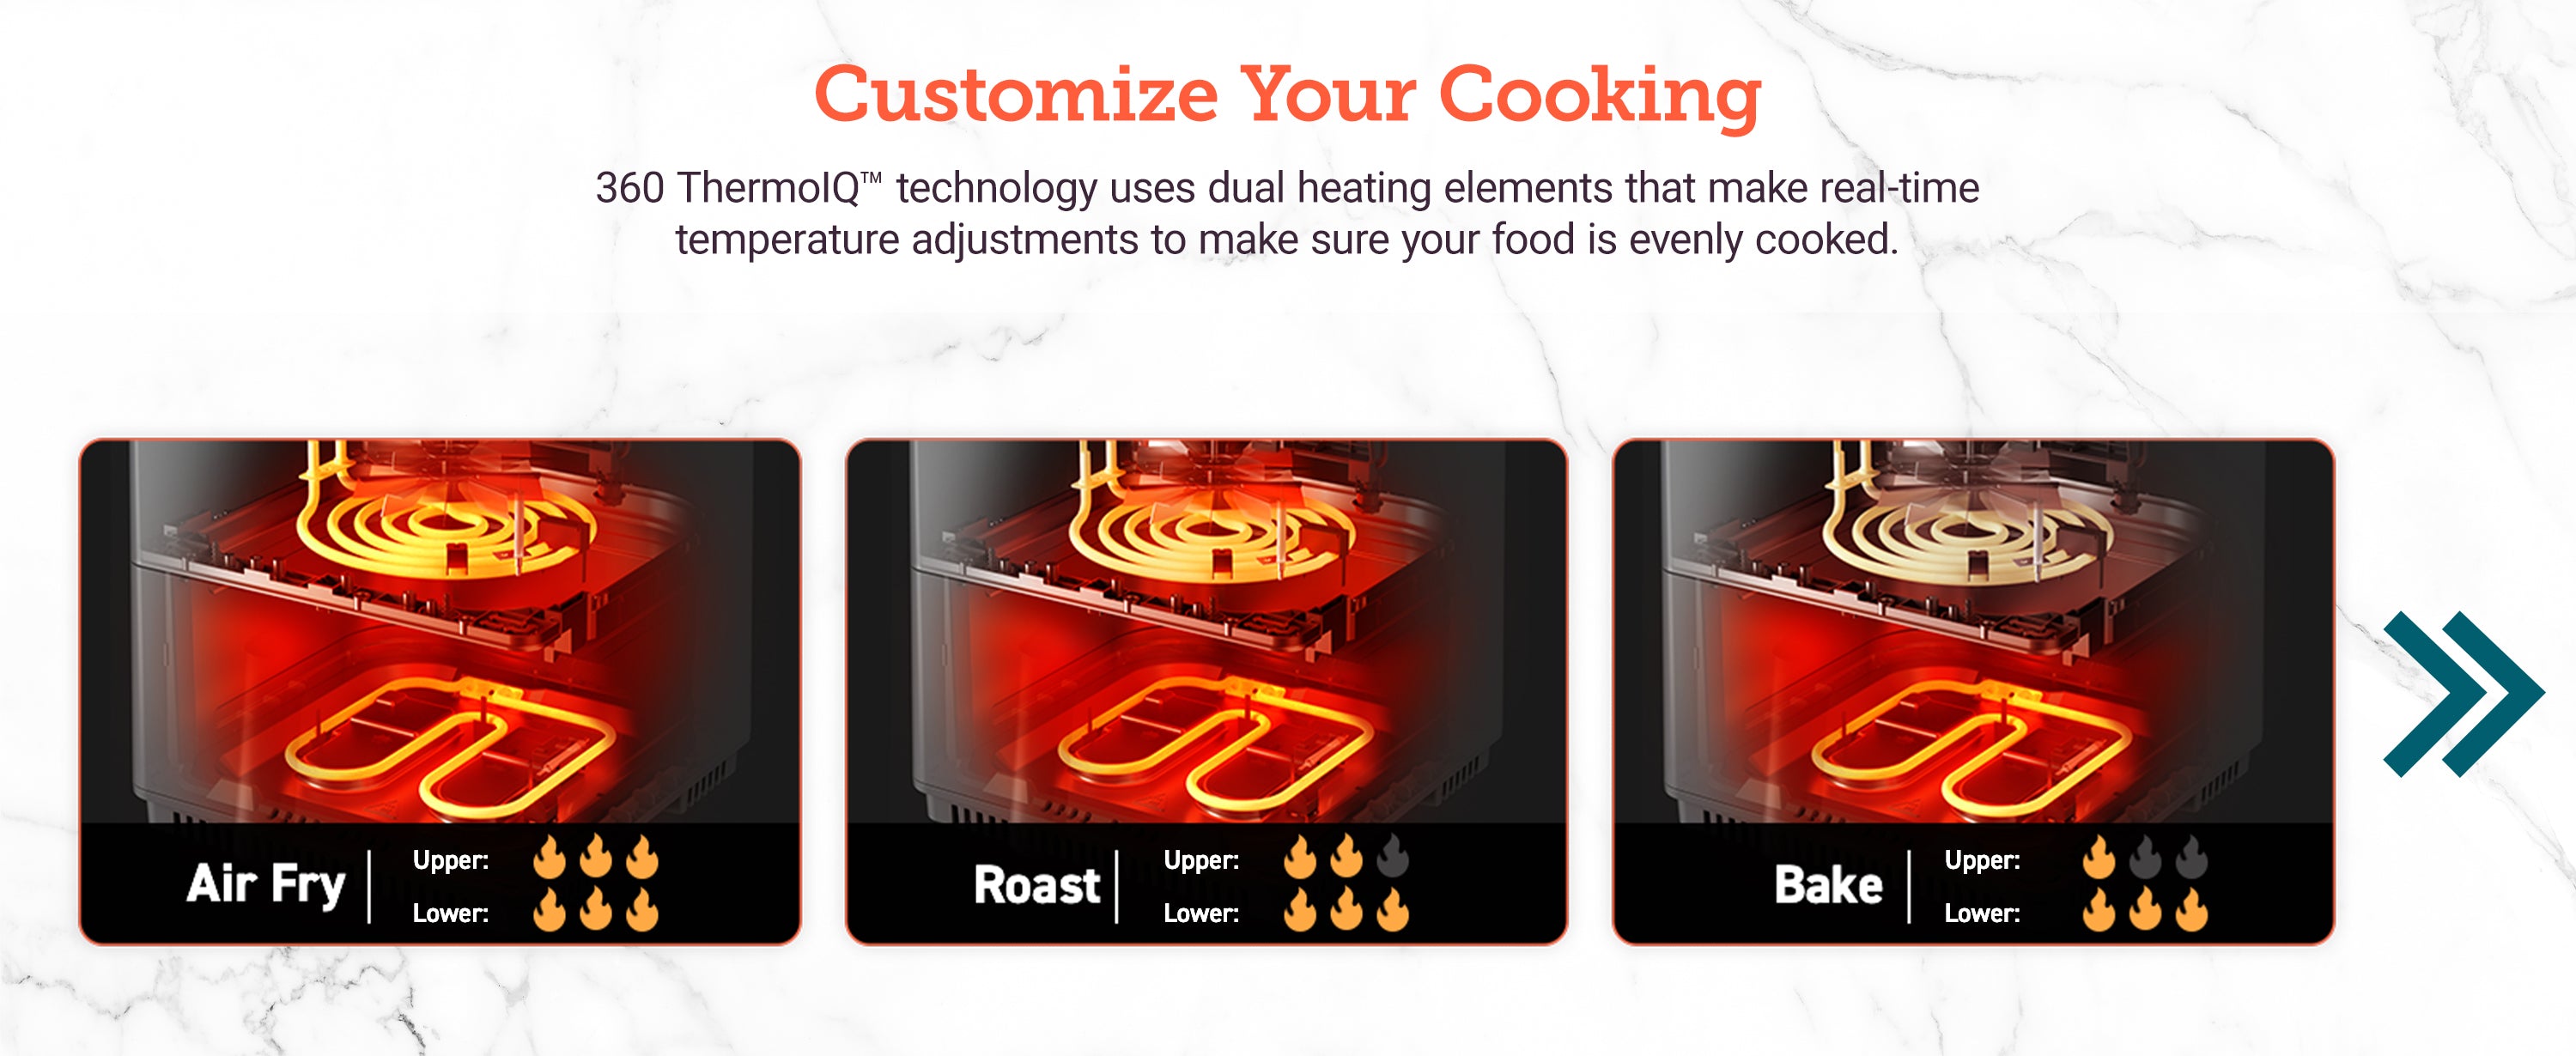 Customize Your Cooking: 360ThermoIQTM technology uses dual heating elements that make real-time temperature adjustments to make sure your food is evenly cooked.